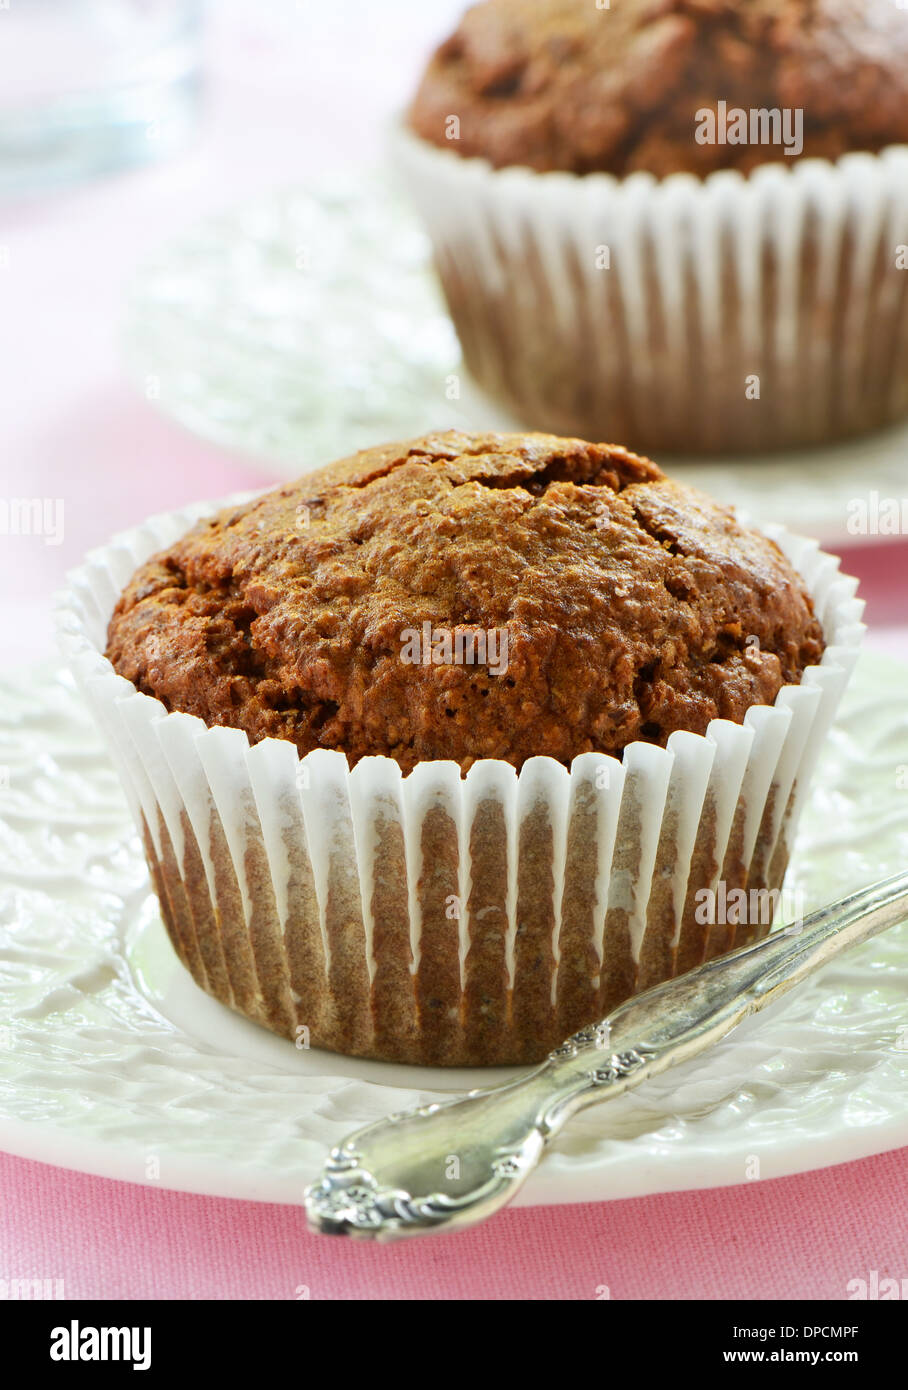 Bran muffins on cream colored rippled plates in vertical format Stock Photo